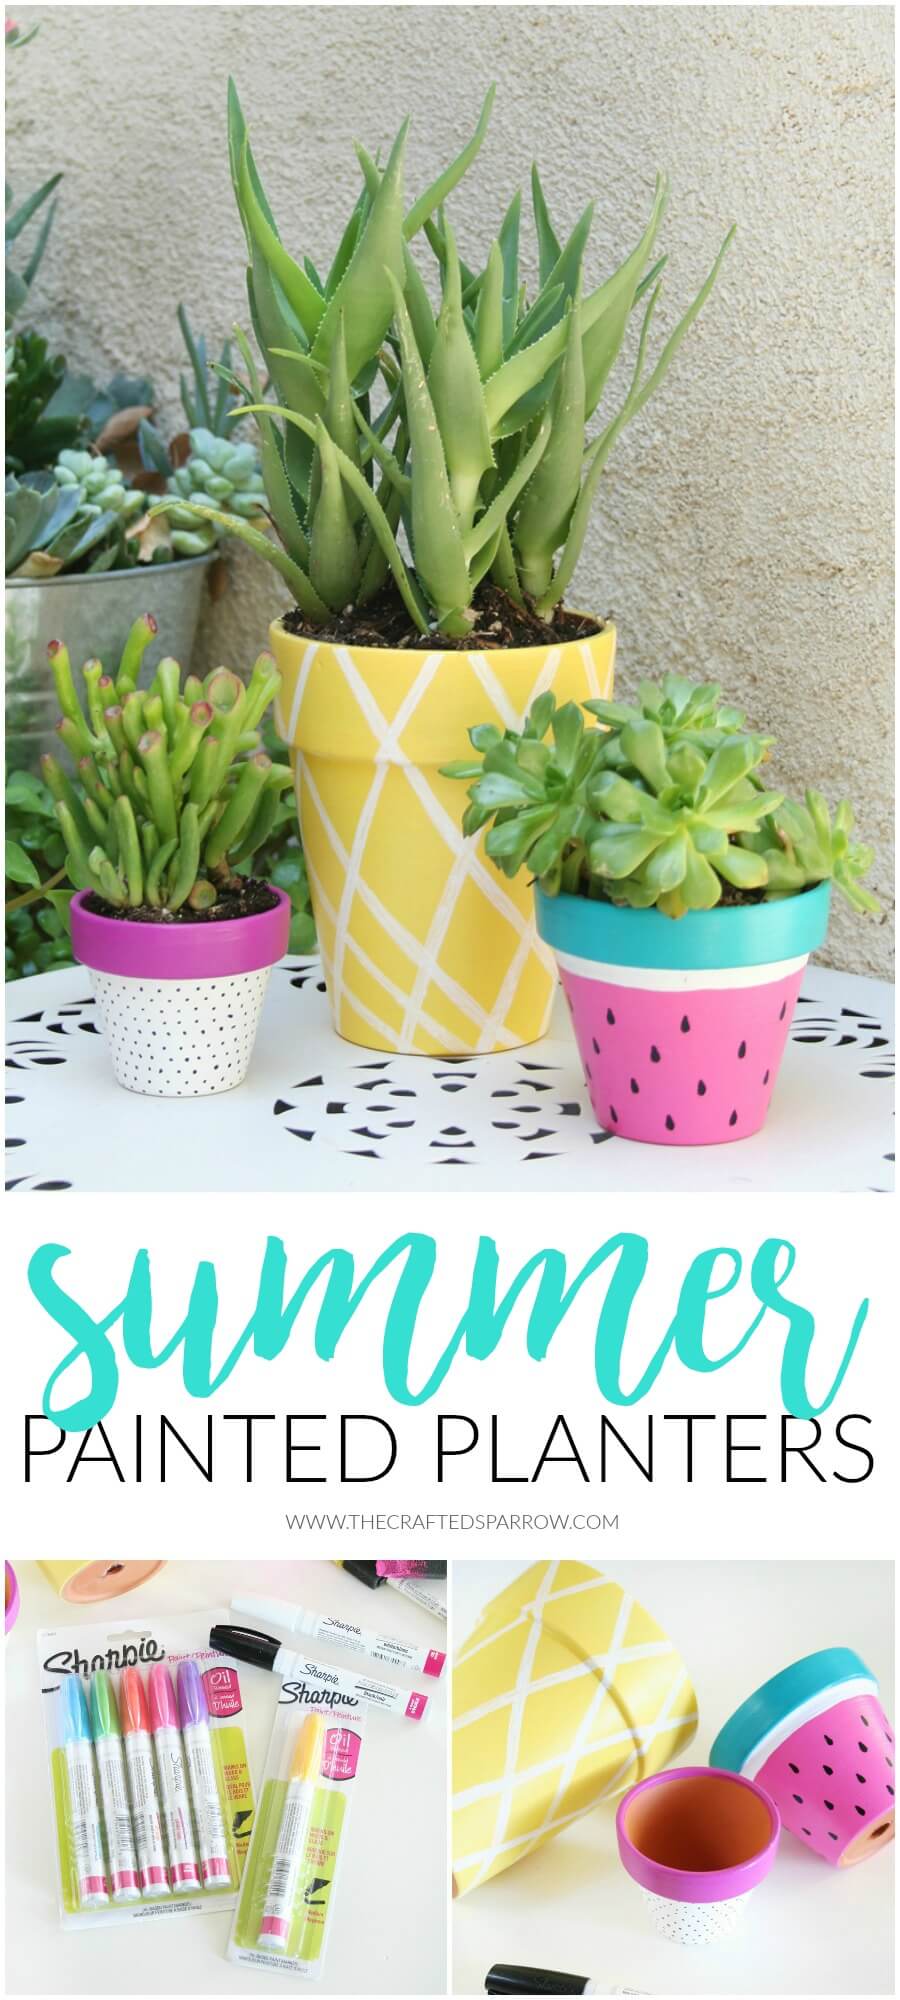 Painted Pots in Fruit and Pastels | DIY Painted Garden Decoration Ideas